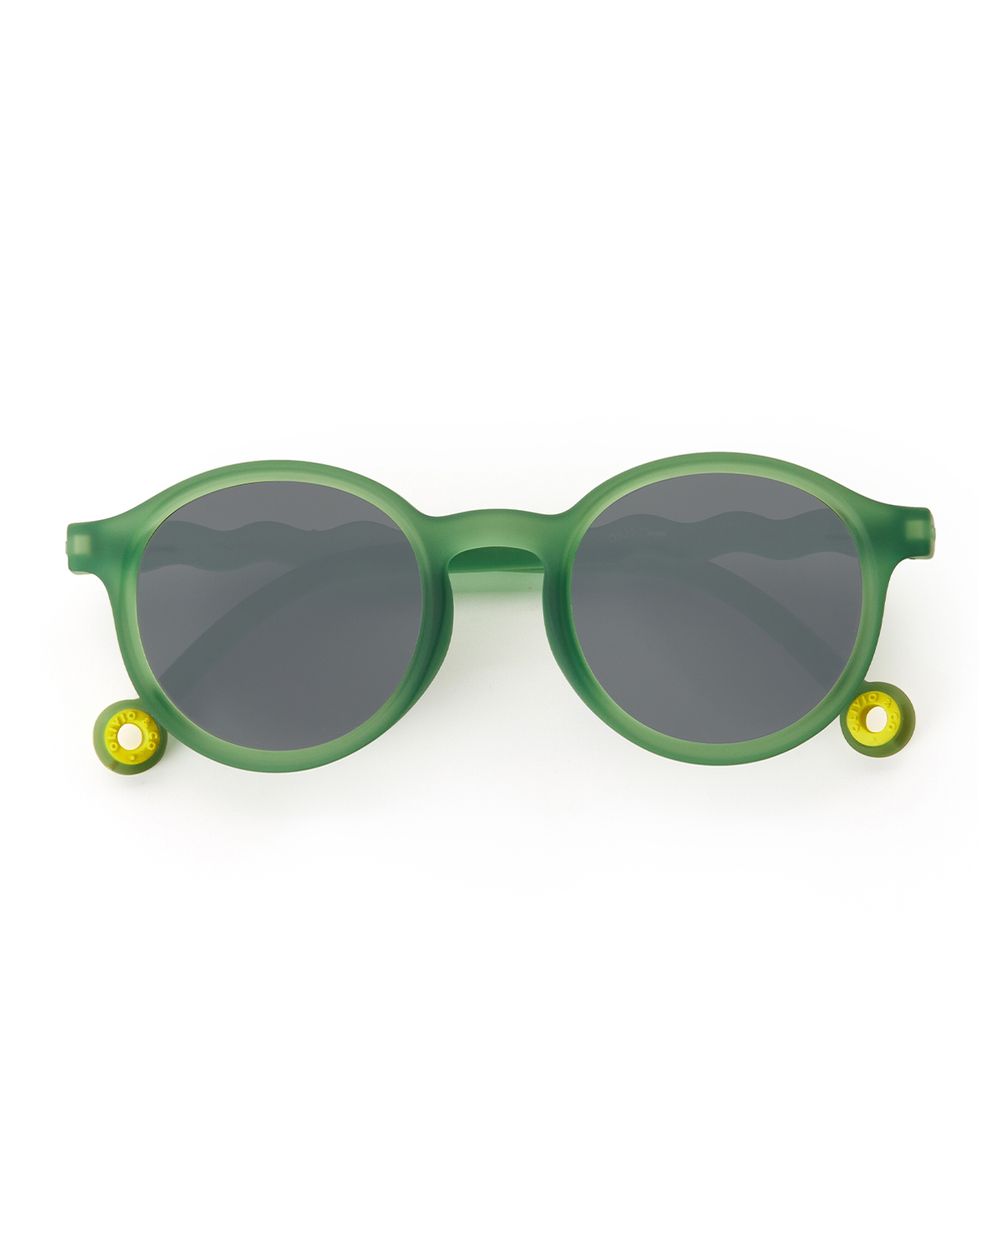 Junior Oval Sunglasses Olive Green with Non-Polarized